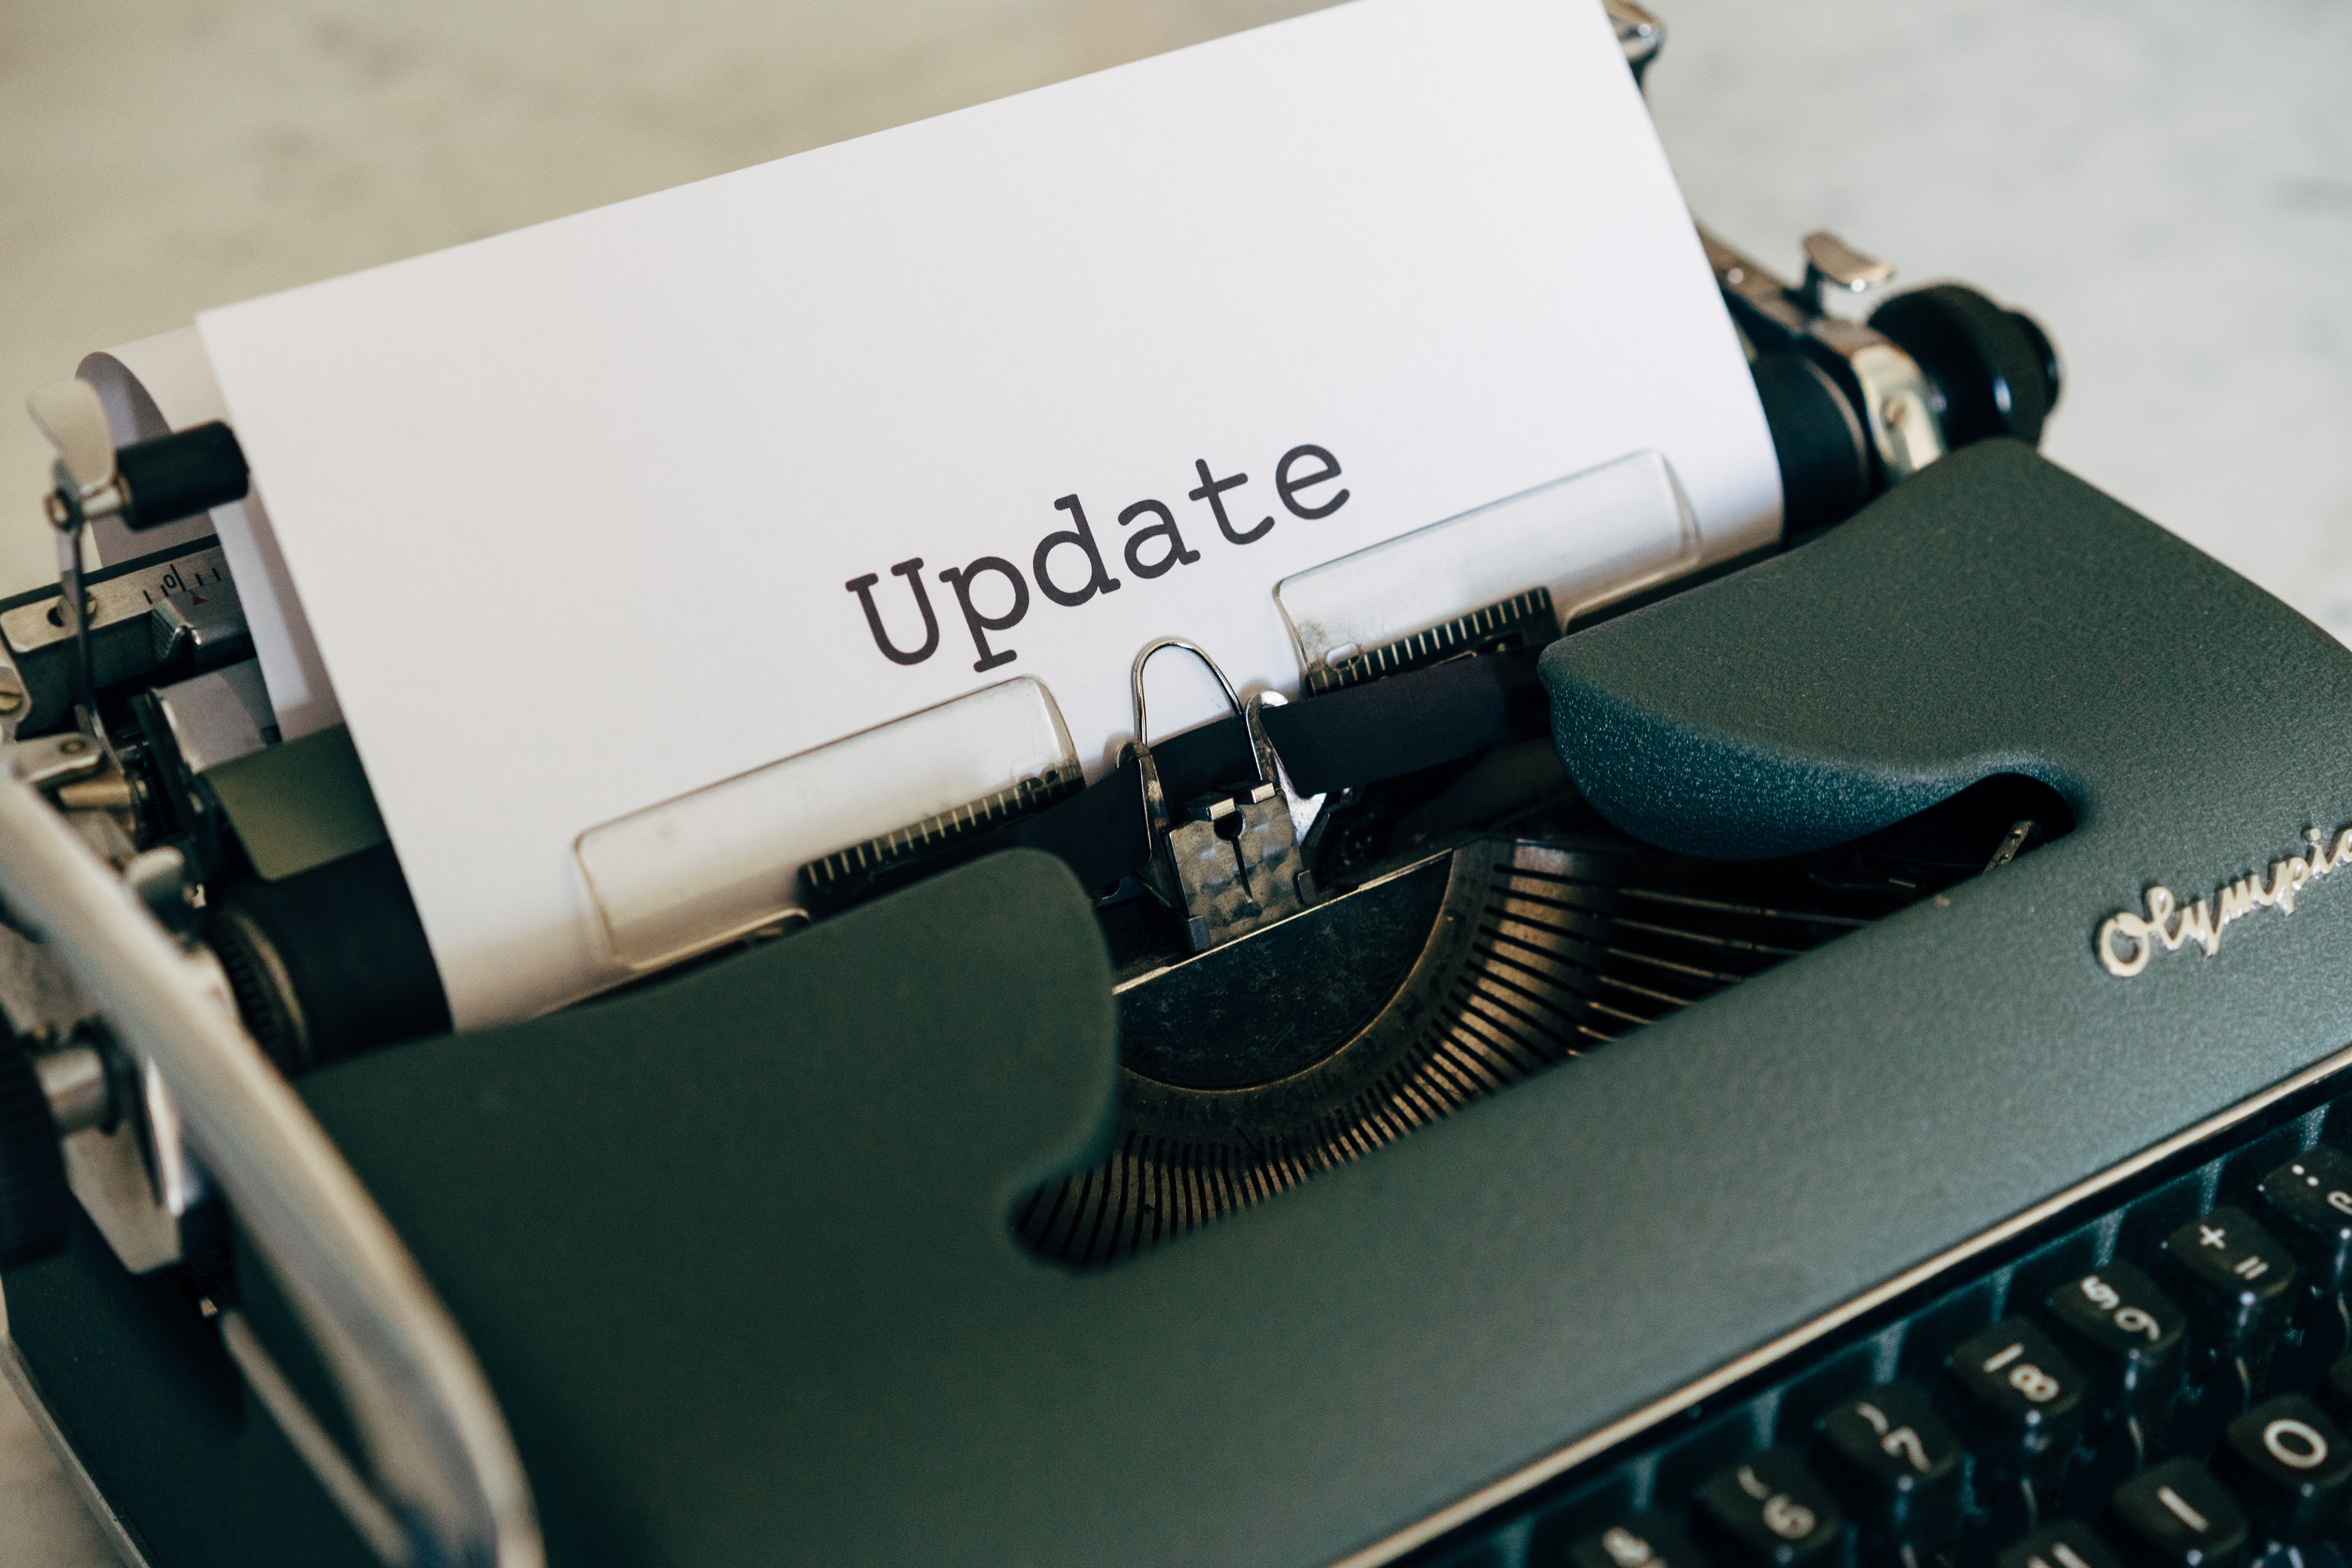 Typewriter with a paper sticking out with a single word: "Update"